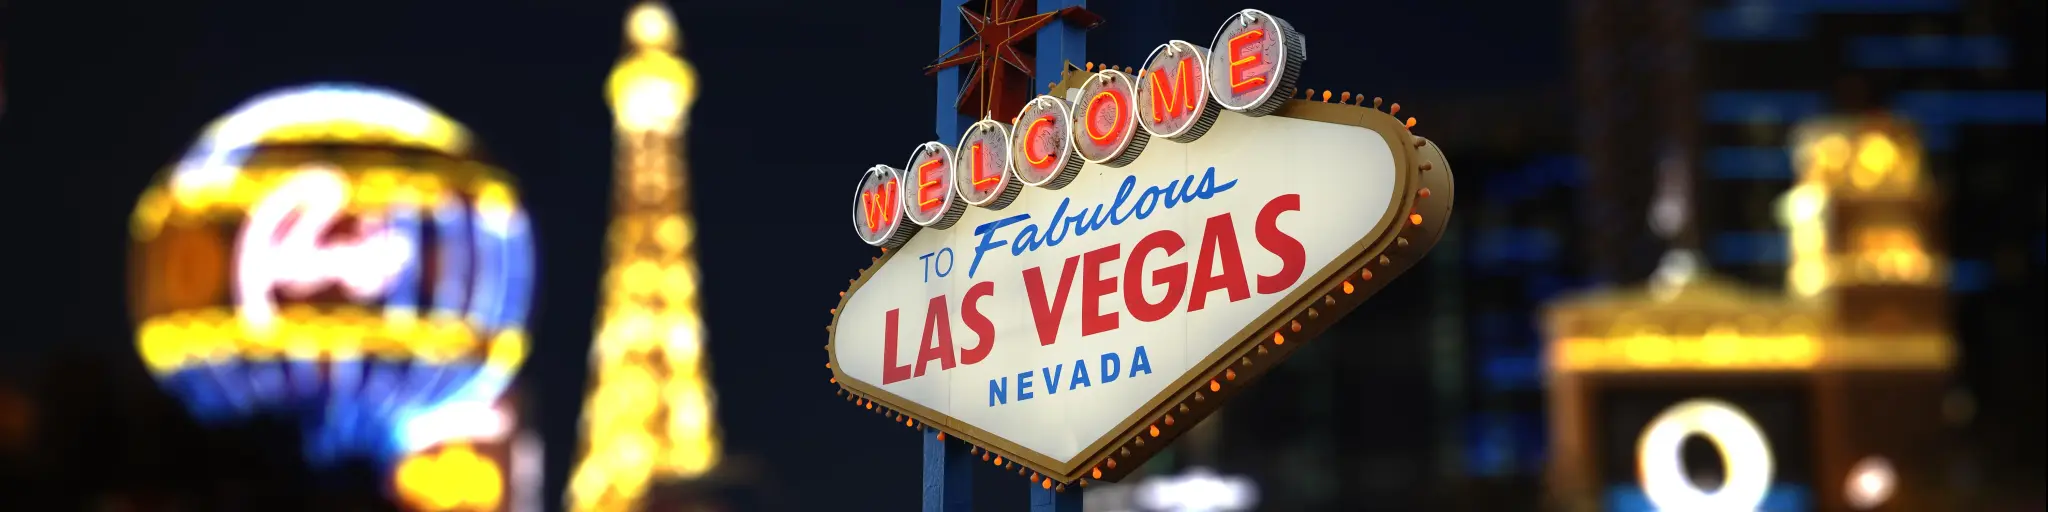 Welcome to Fabulous Las Vegas Neon Sign. Intentional Blurred Las Vegas Strip In Background